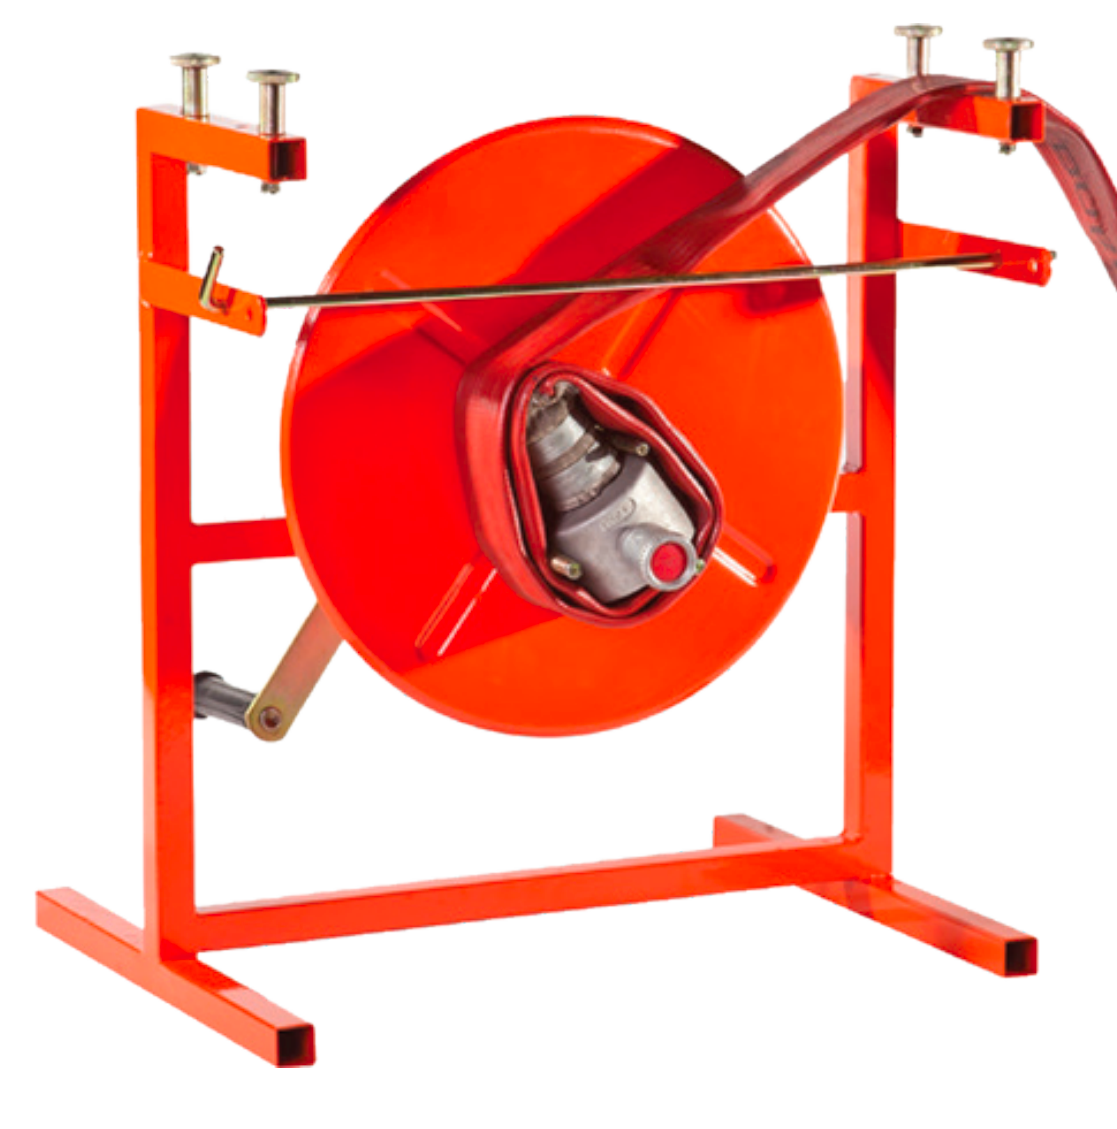 Tiger Lifting FH-02 – General Type Fire Hose Winder